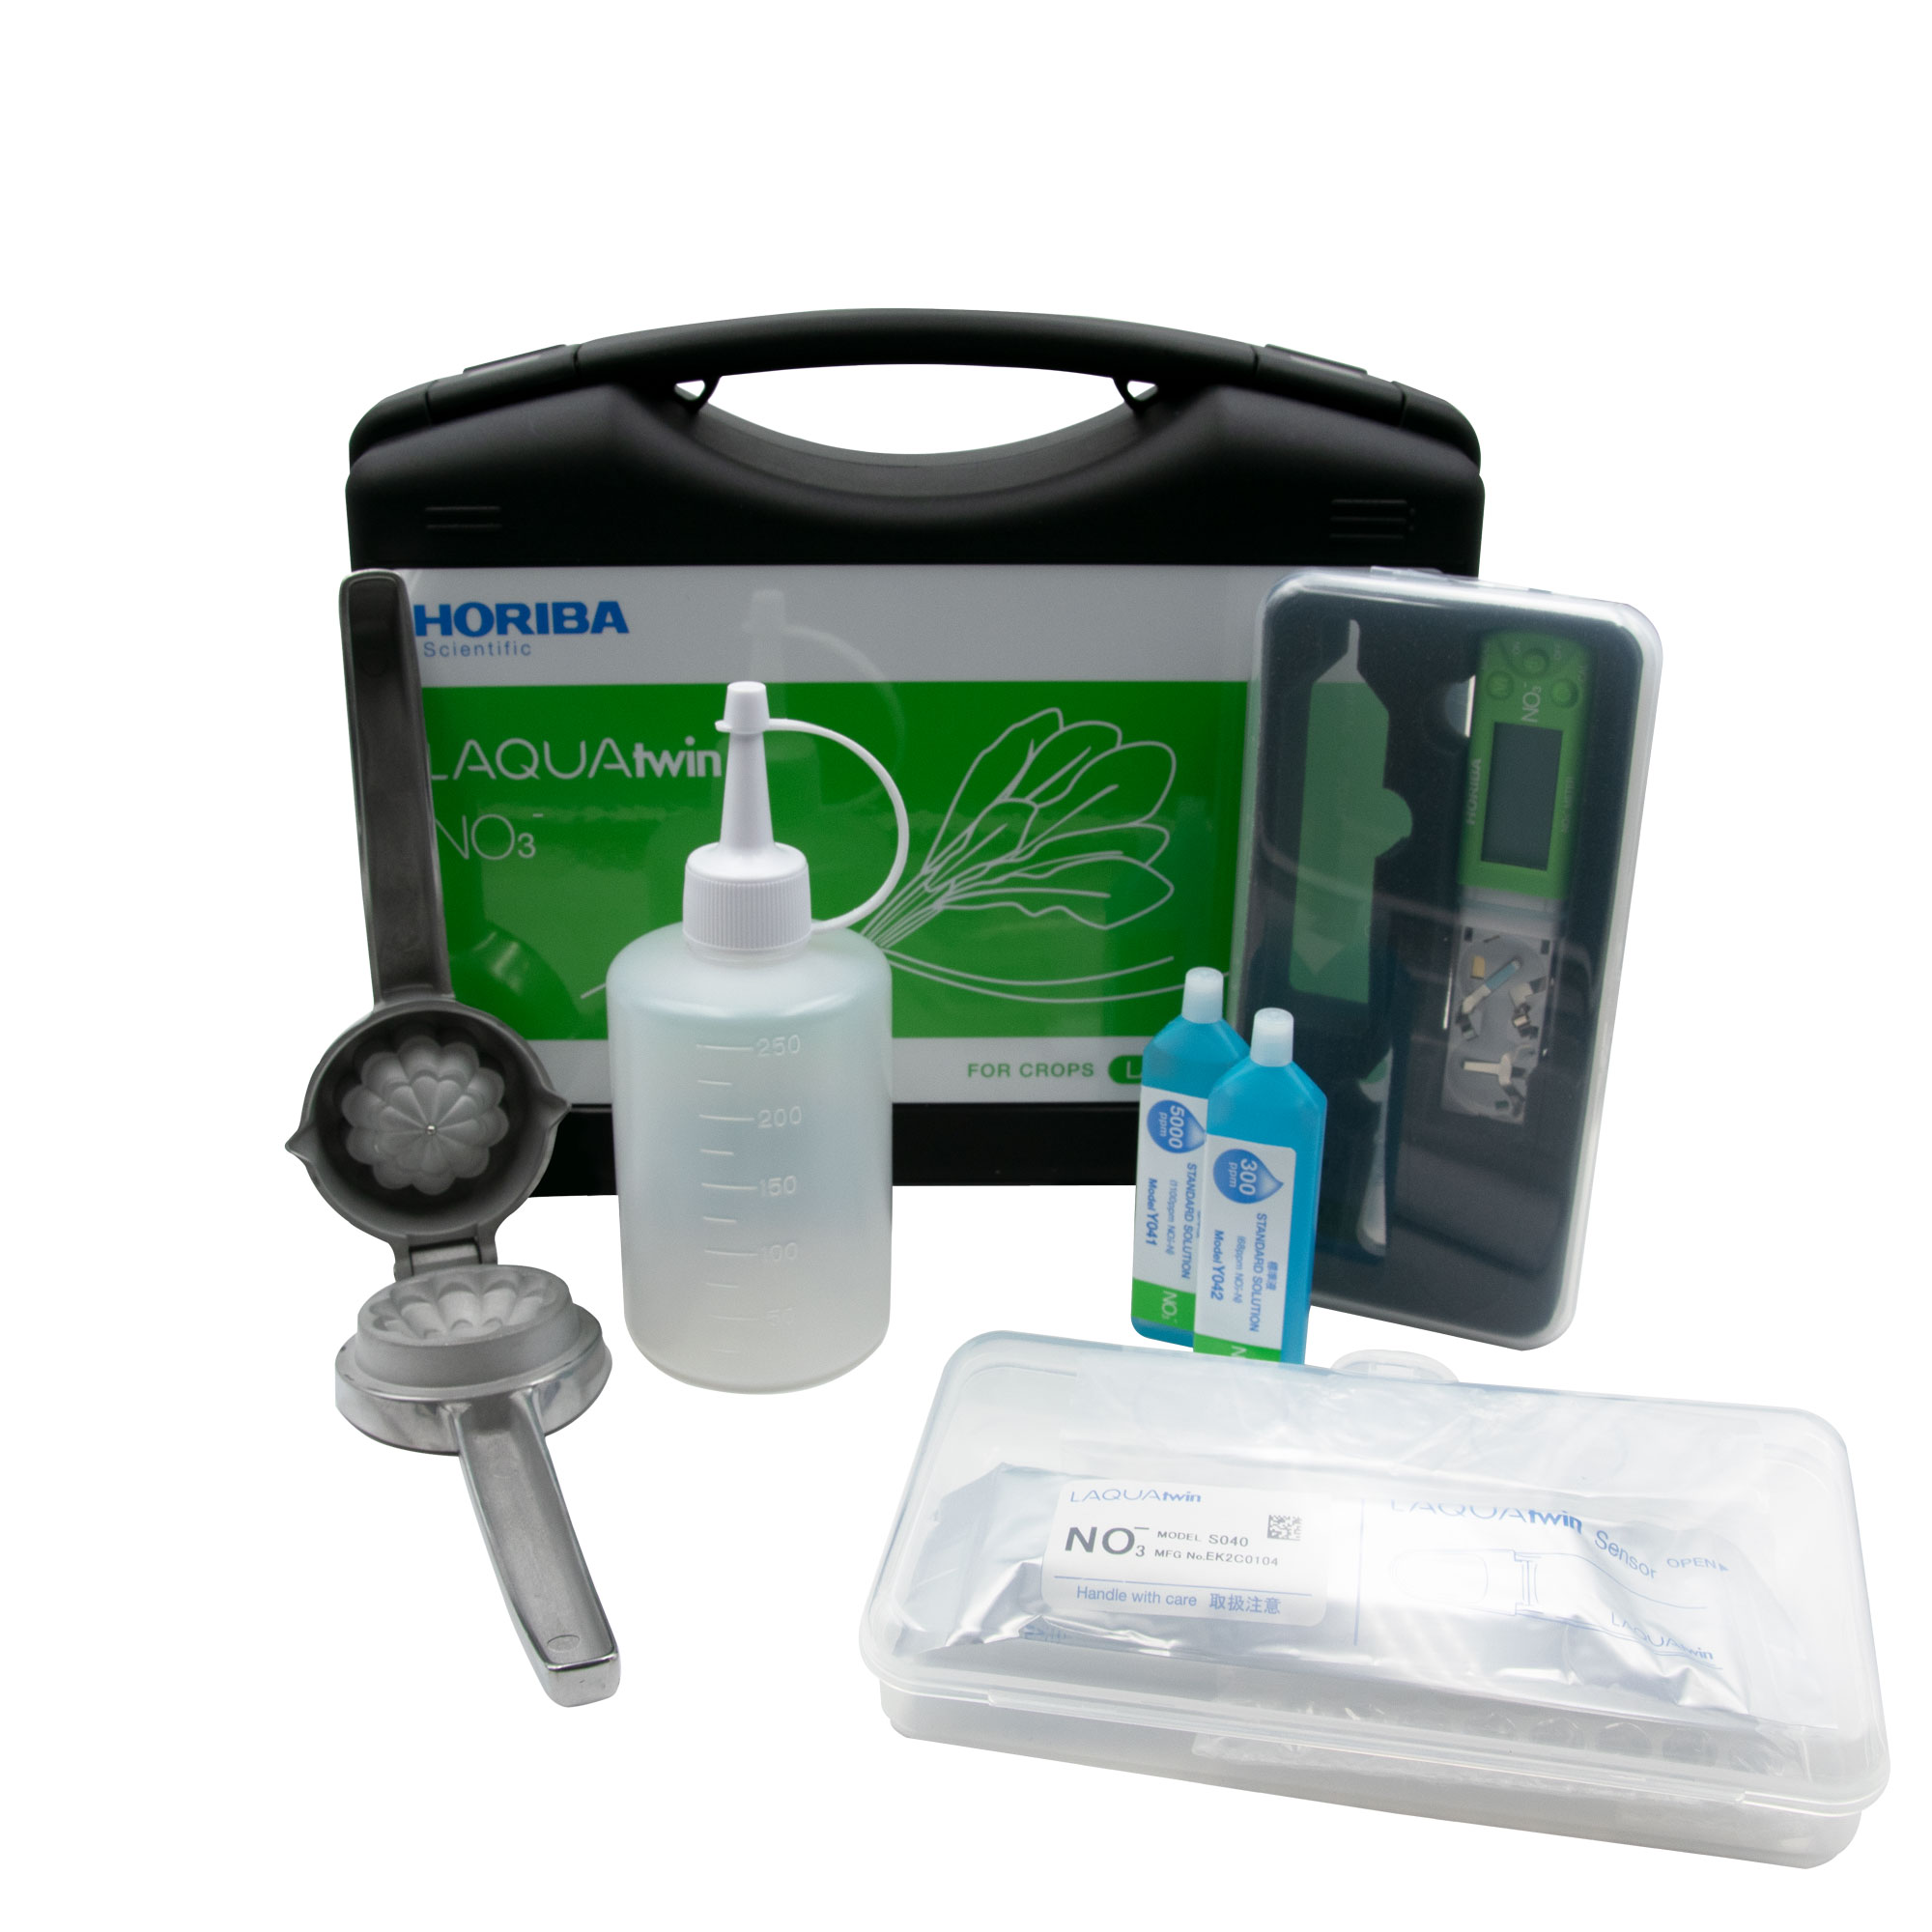 Horiba LAQUAtwin Nitrate Ion (NO3-) Tester for crops, in carrying case with 5 Pipettes, Crop sample press, 3 cups